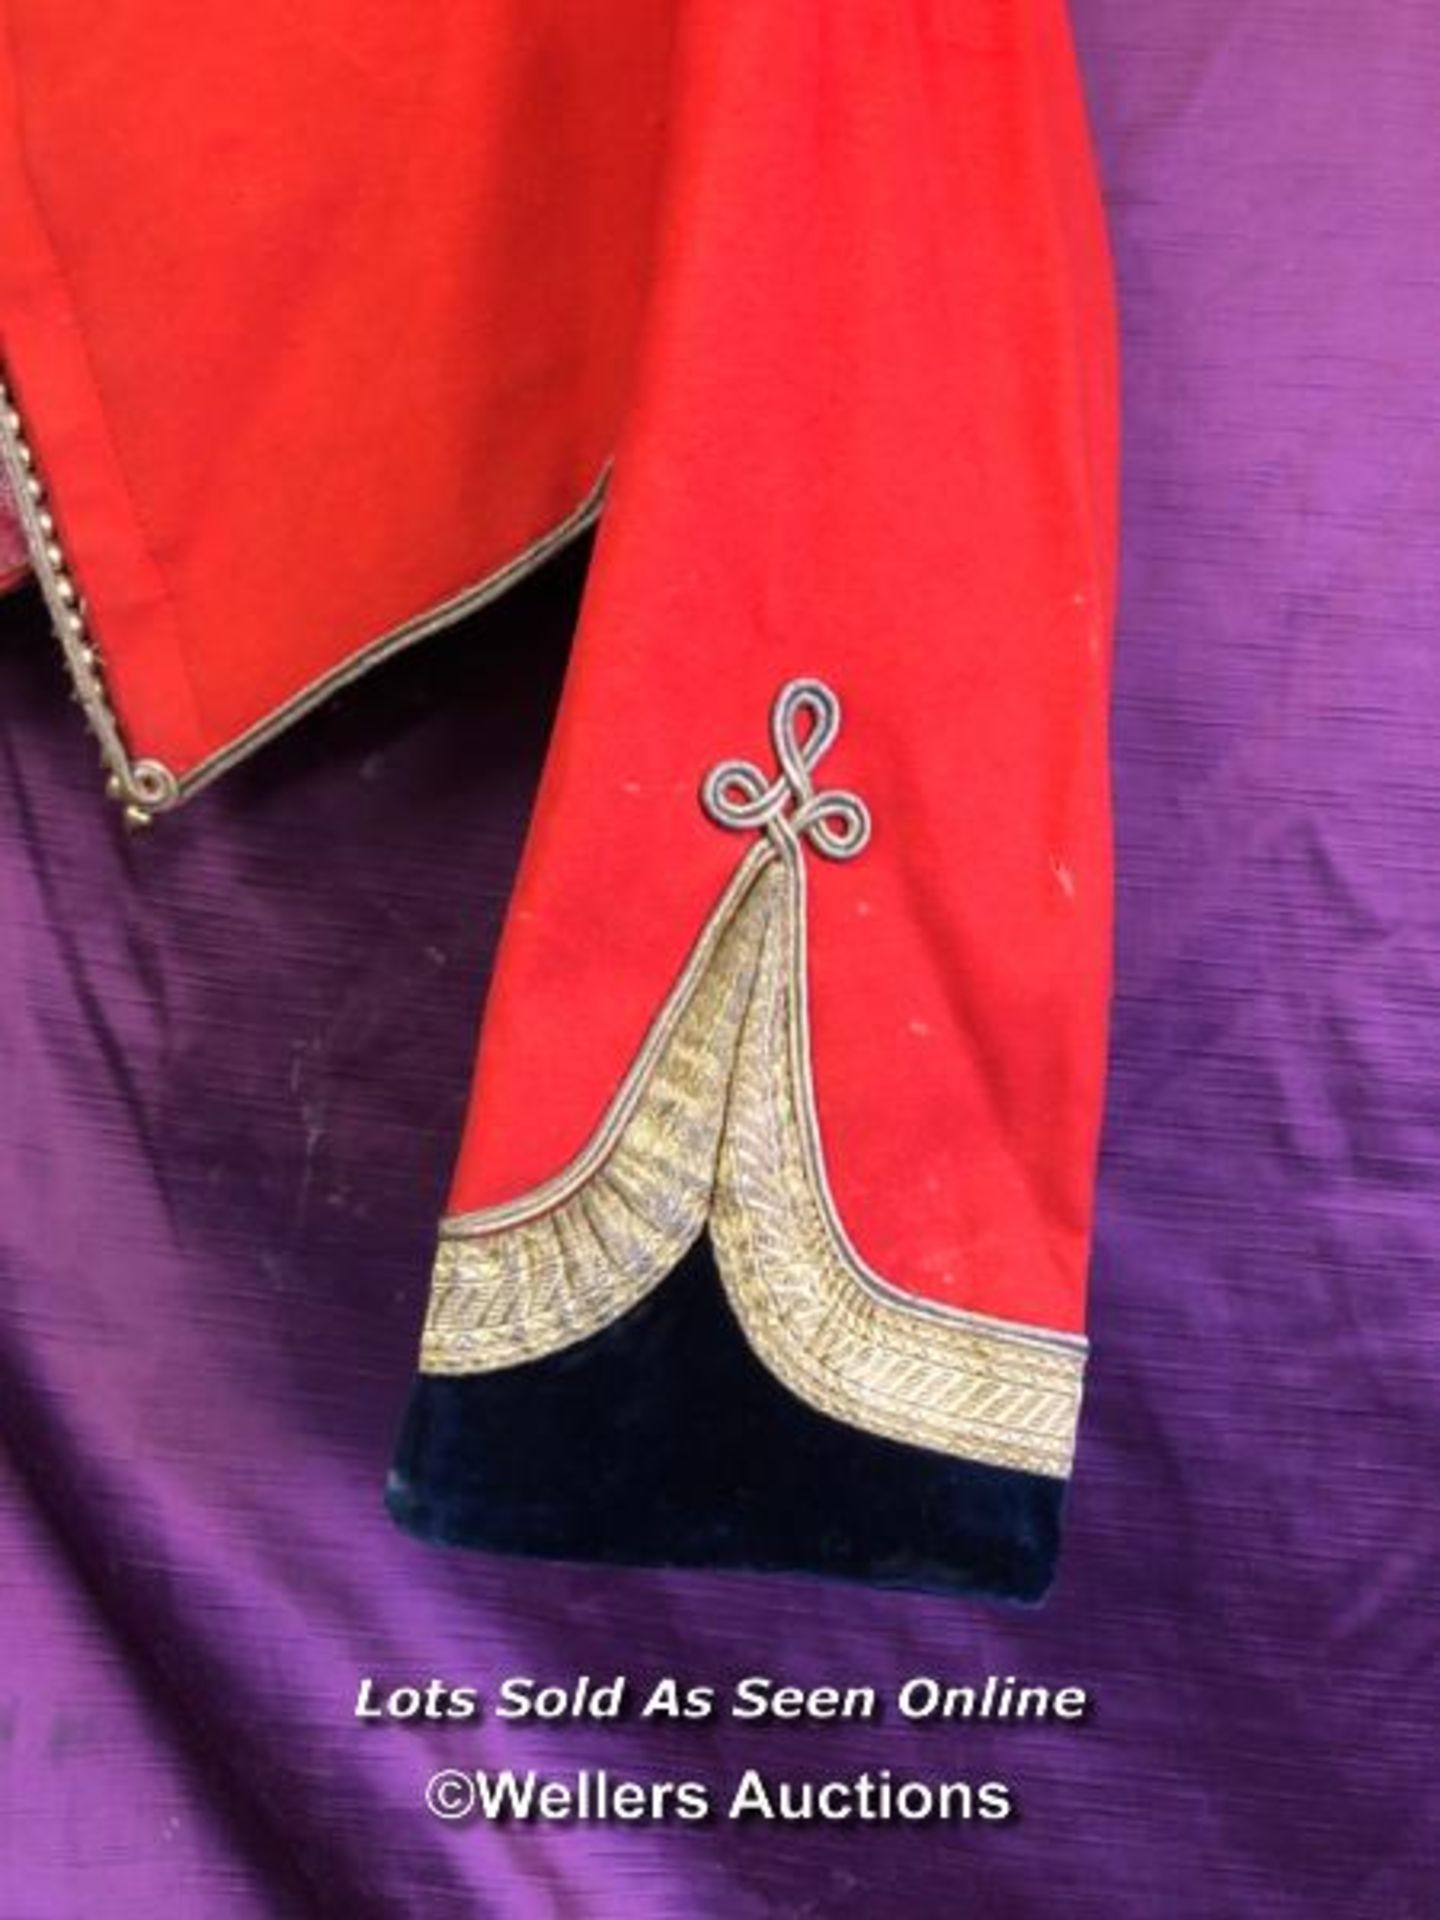 19TH CENTURY OFFICERS MESS TUNIC - Image 2 of 5